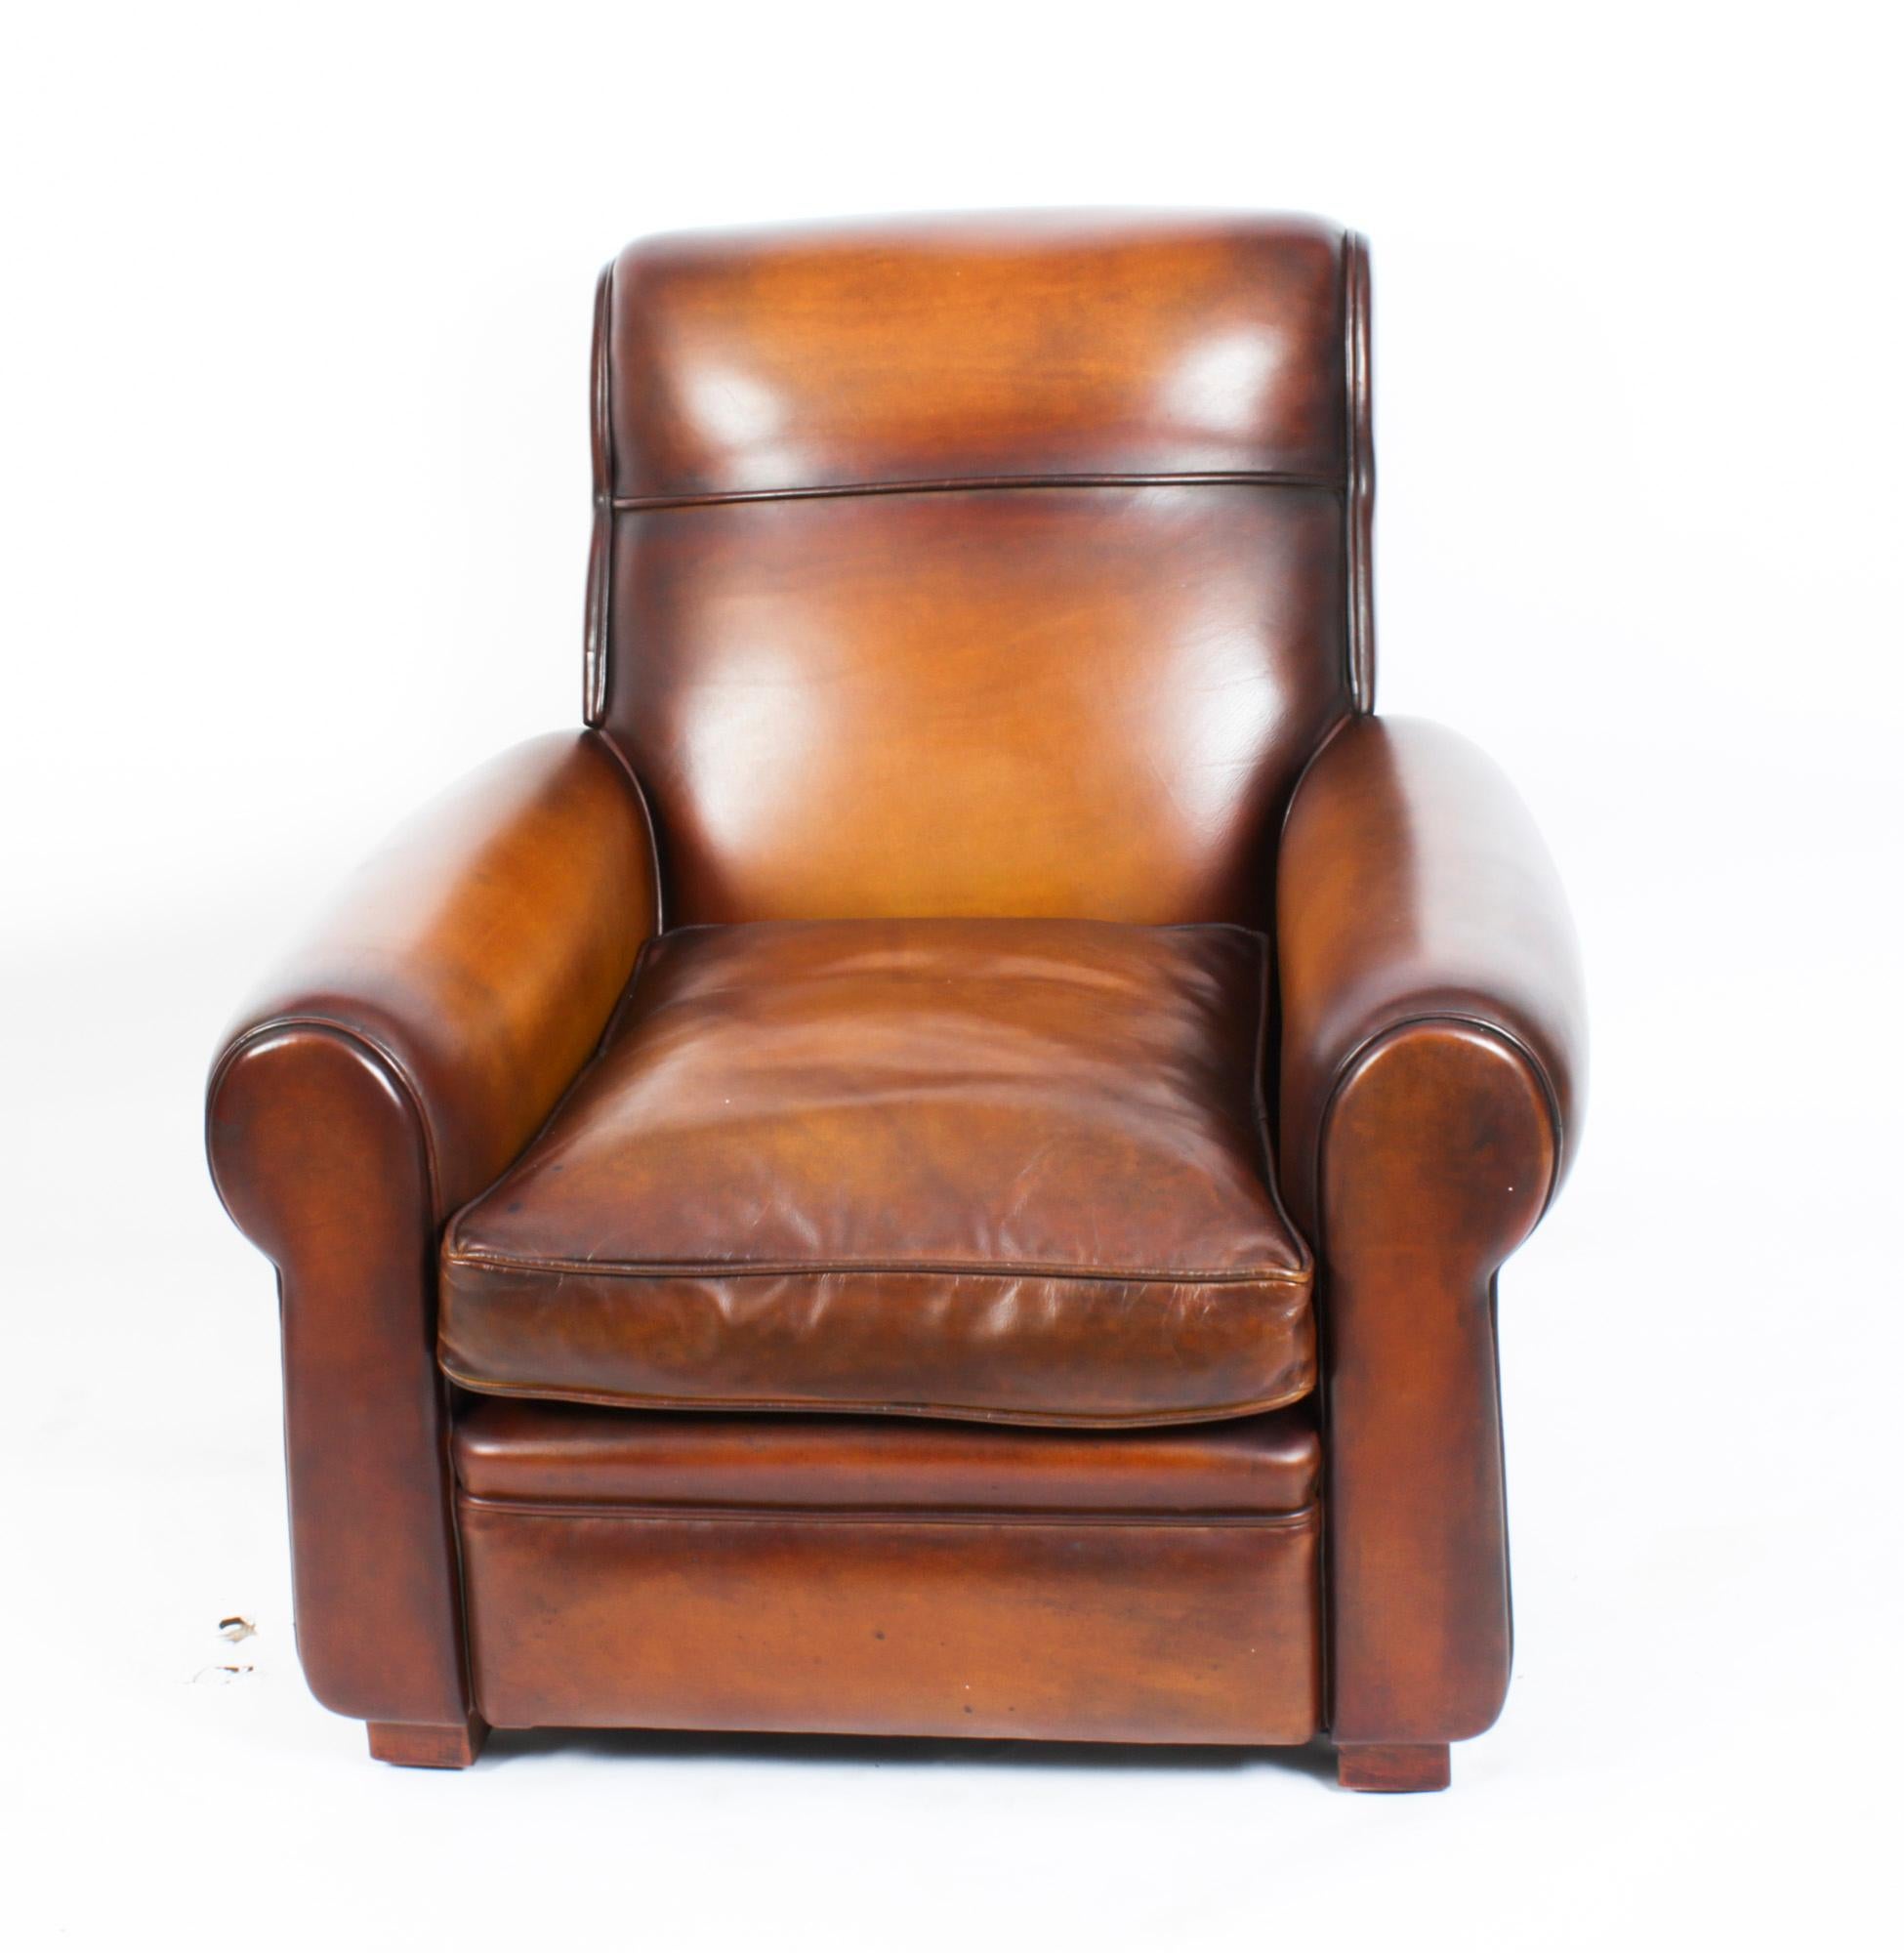 This is an absolutely fabulous antique pair of English leather Club armchairs, circa 1900 in date.
 
With shaped back and loose cushions they are a really comfortable pair of chairs, ready for you to relax in comfort.
 
The hand dyed leather is